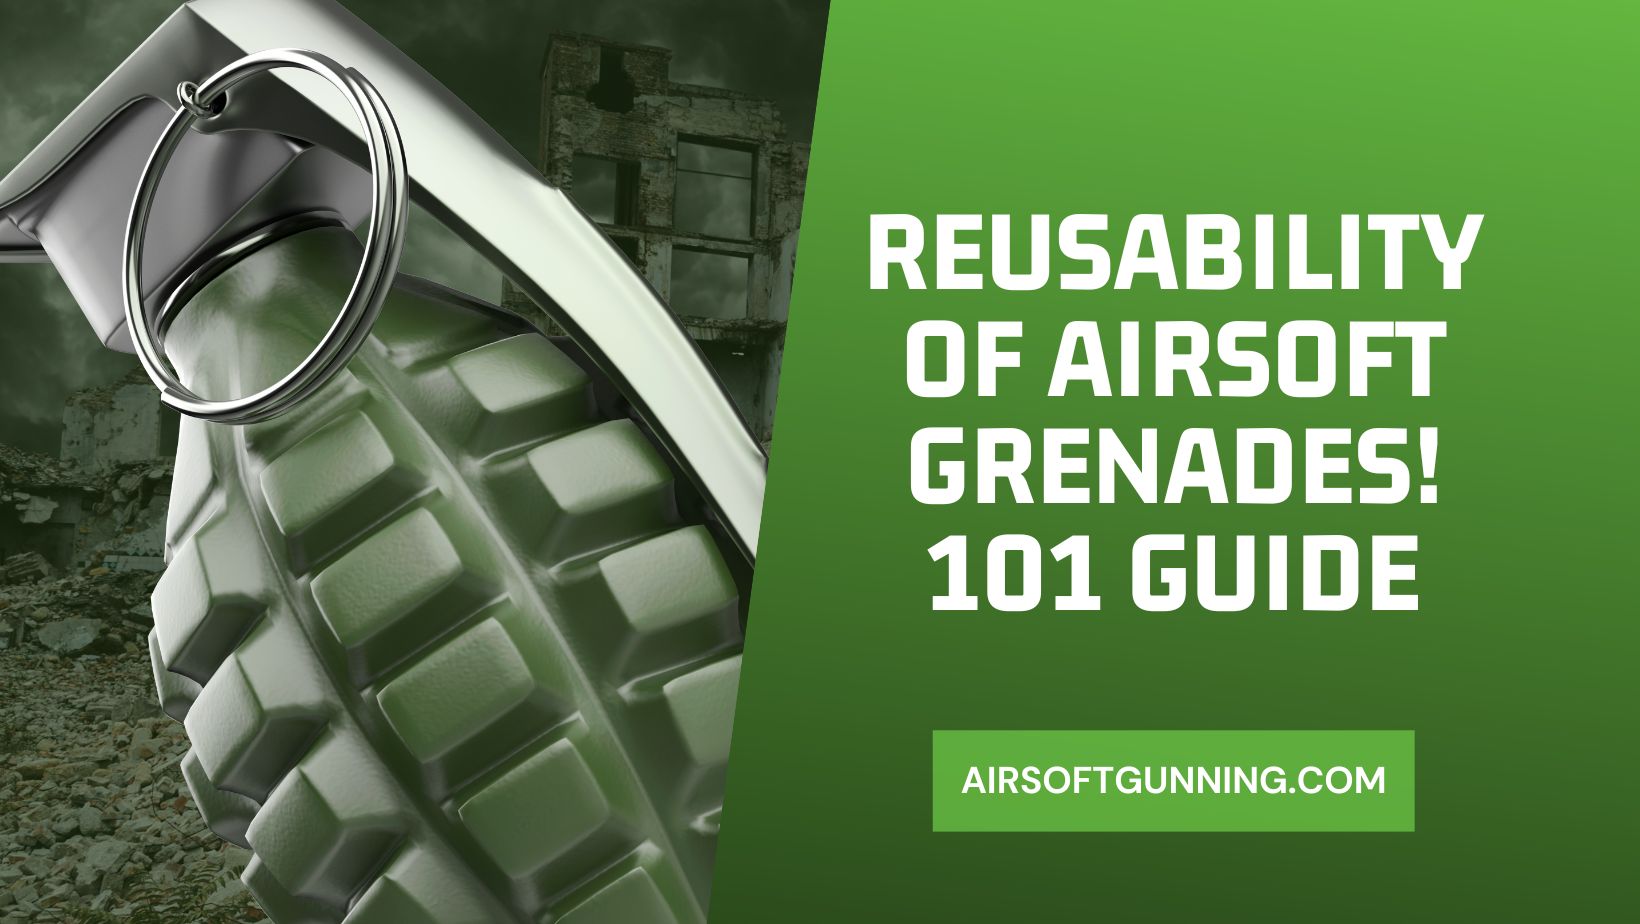 Reusability of Airsoft Grenades